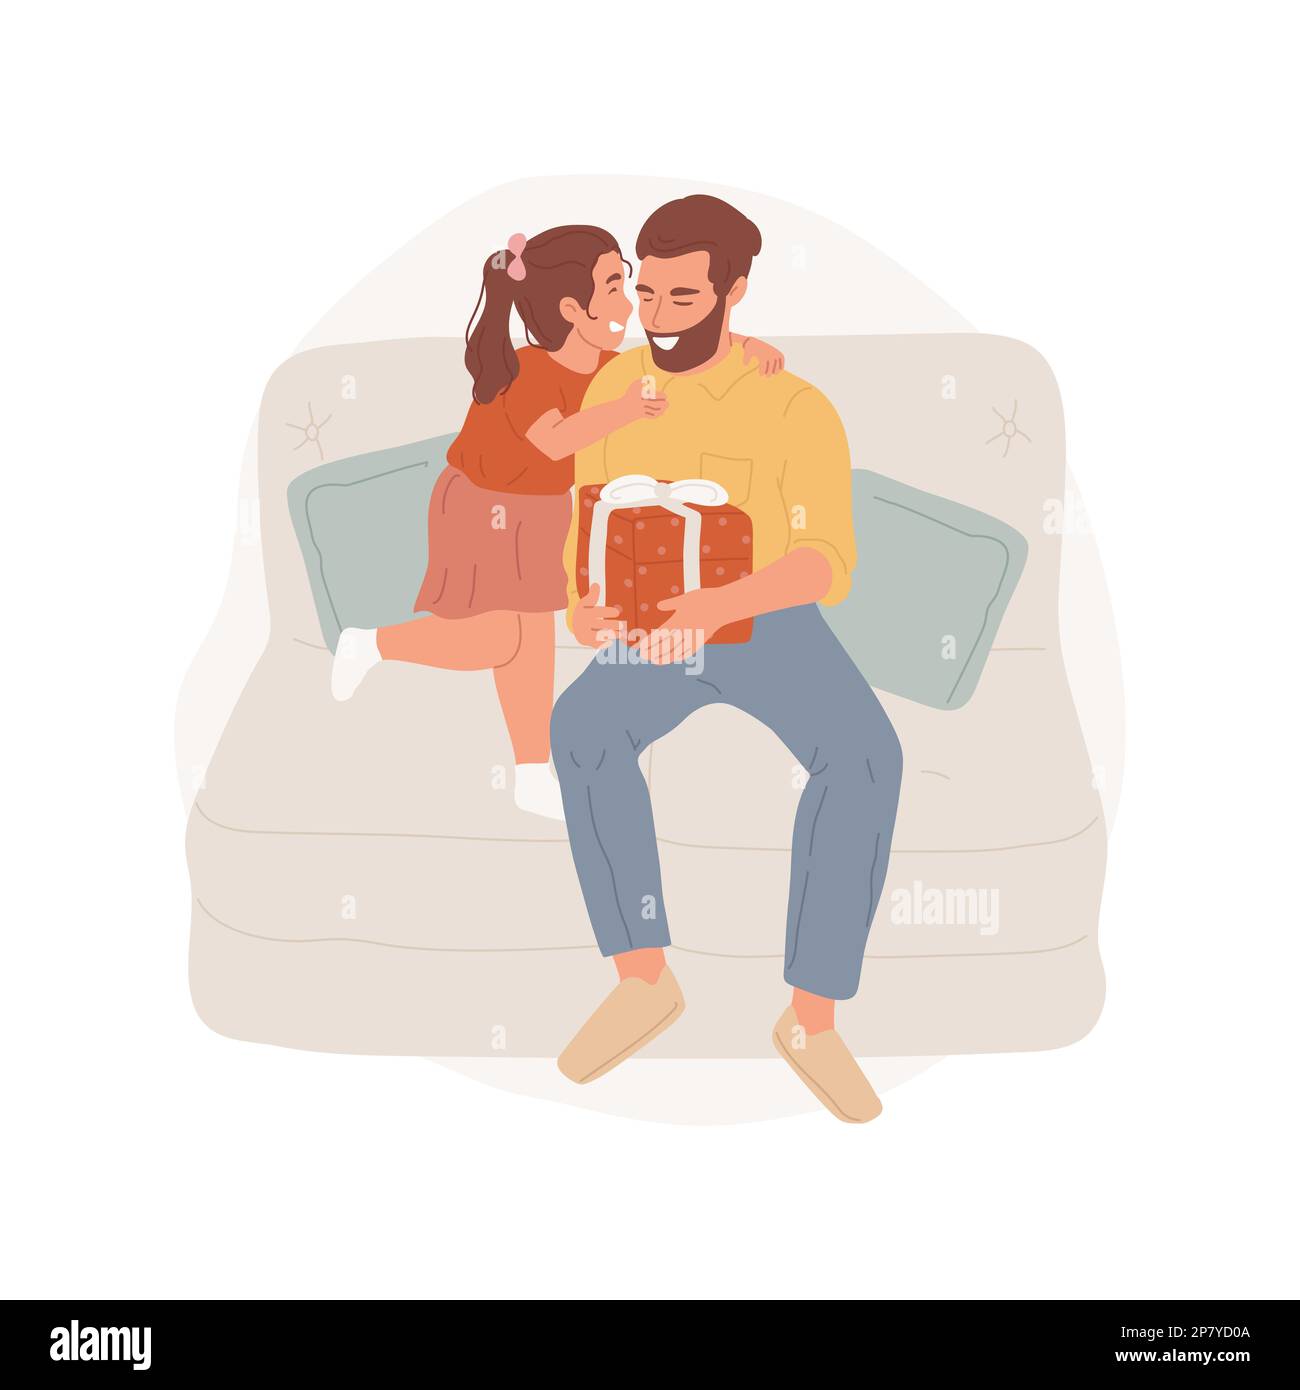 Giving presents isolated cartoon vector illustration. Daughter congratulating dad and giving a gift, preparing a surprise, Fathers Day celebration, family leisure time together vector cartoon. Stock Vector